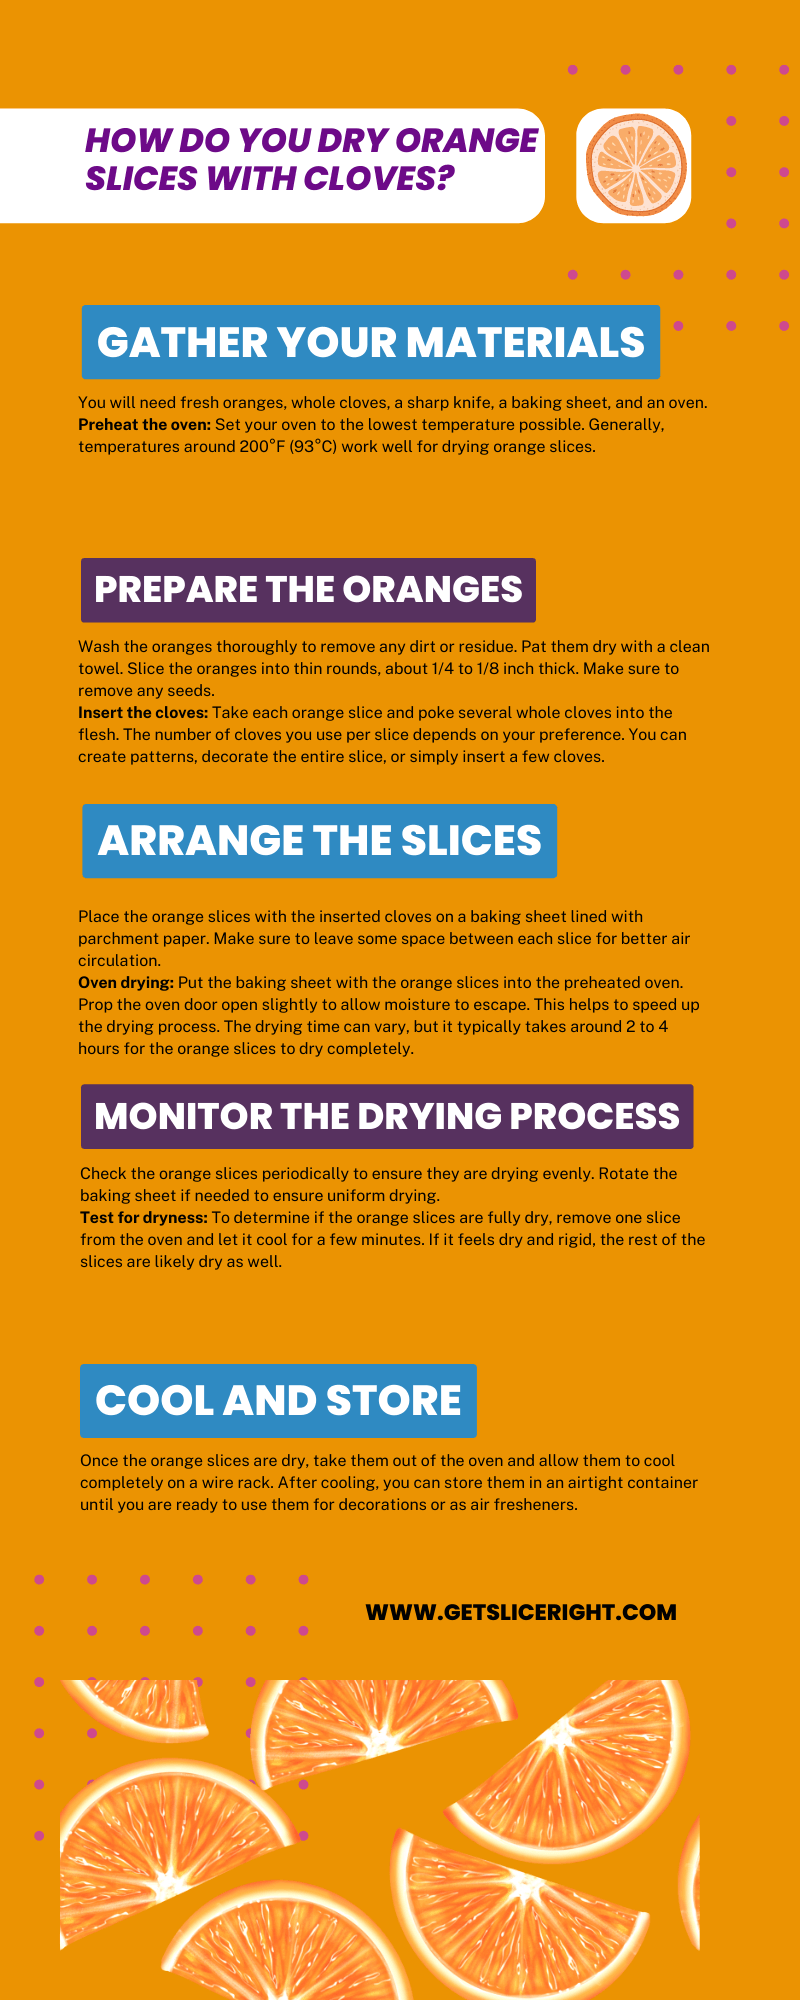 How do you dry orange slices with cloves - infographics